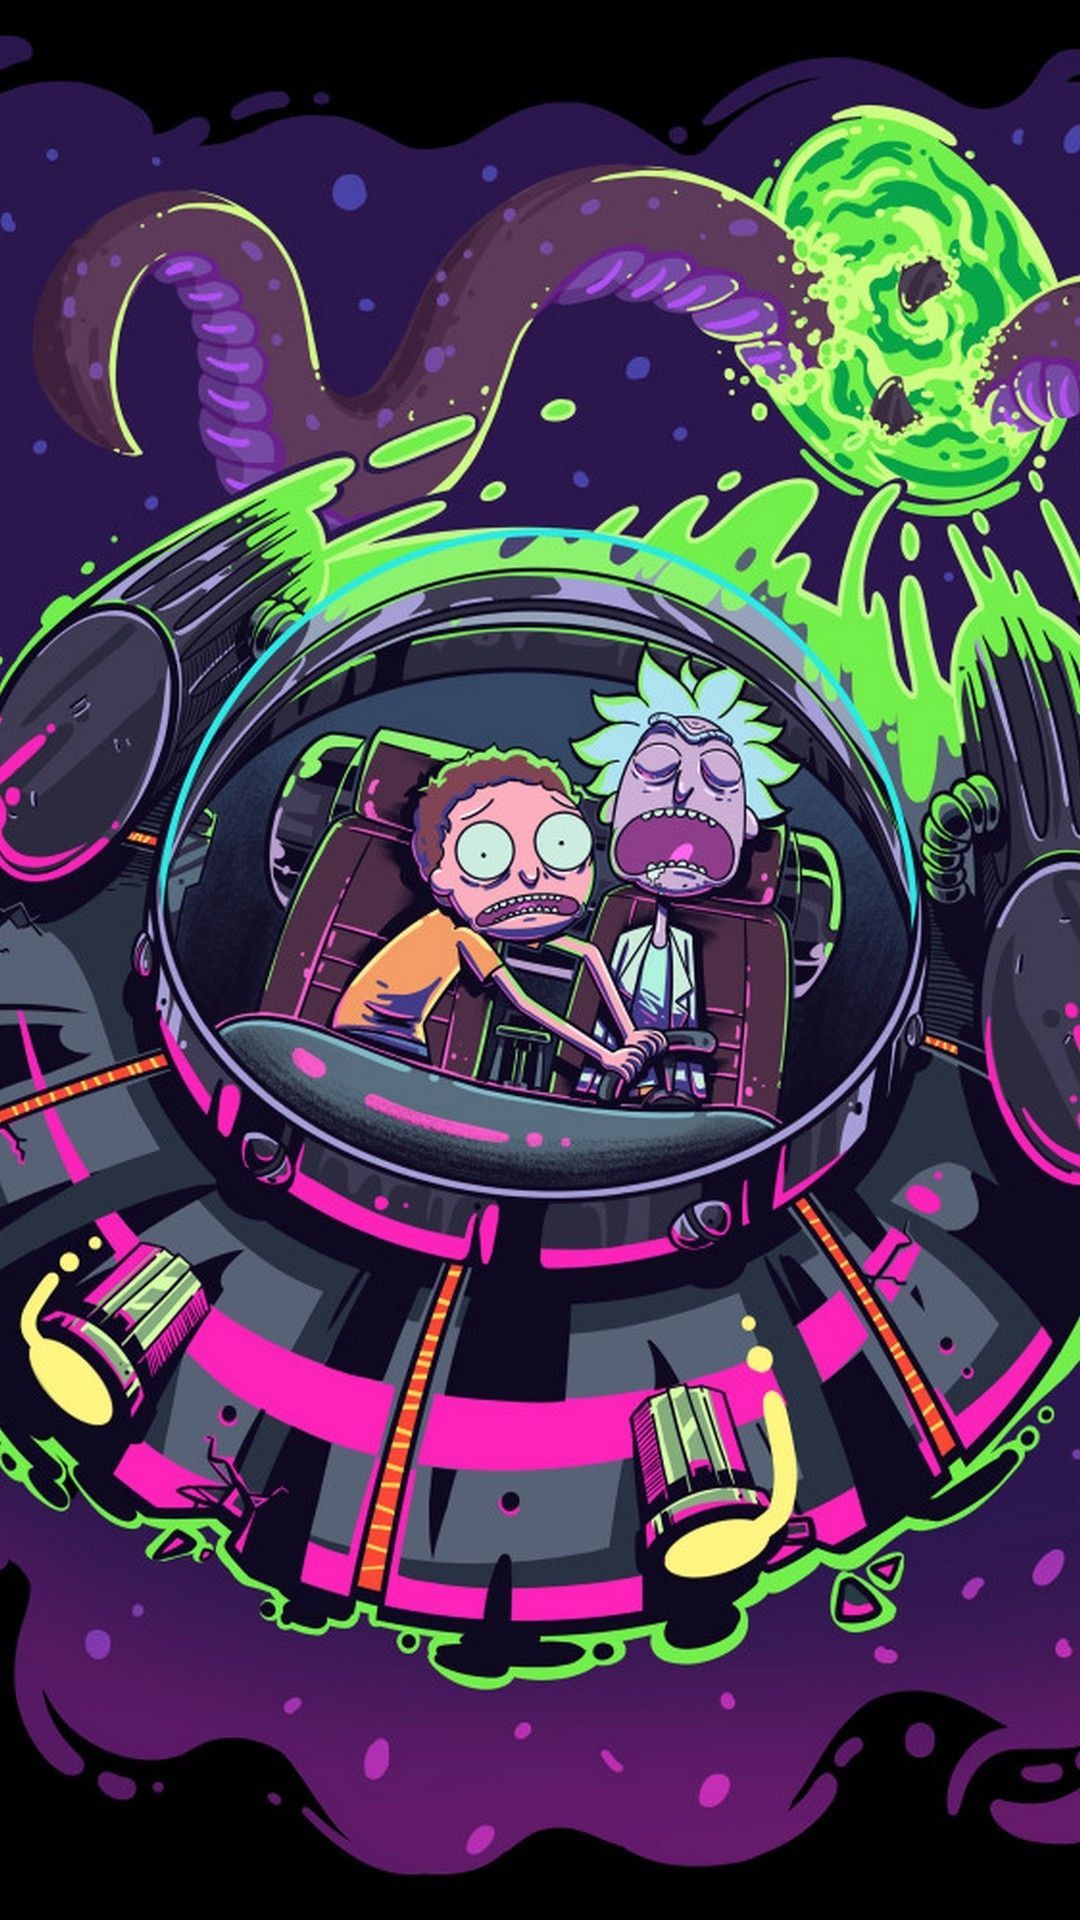 Rick and Morty Trippy Wallpaper Free Rick and Morty Trippy